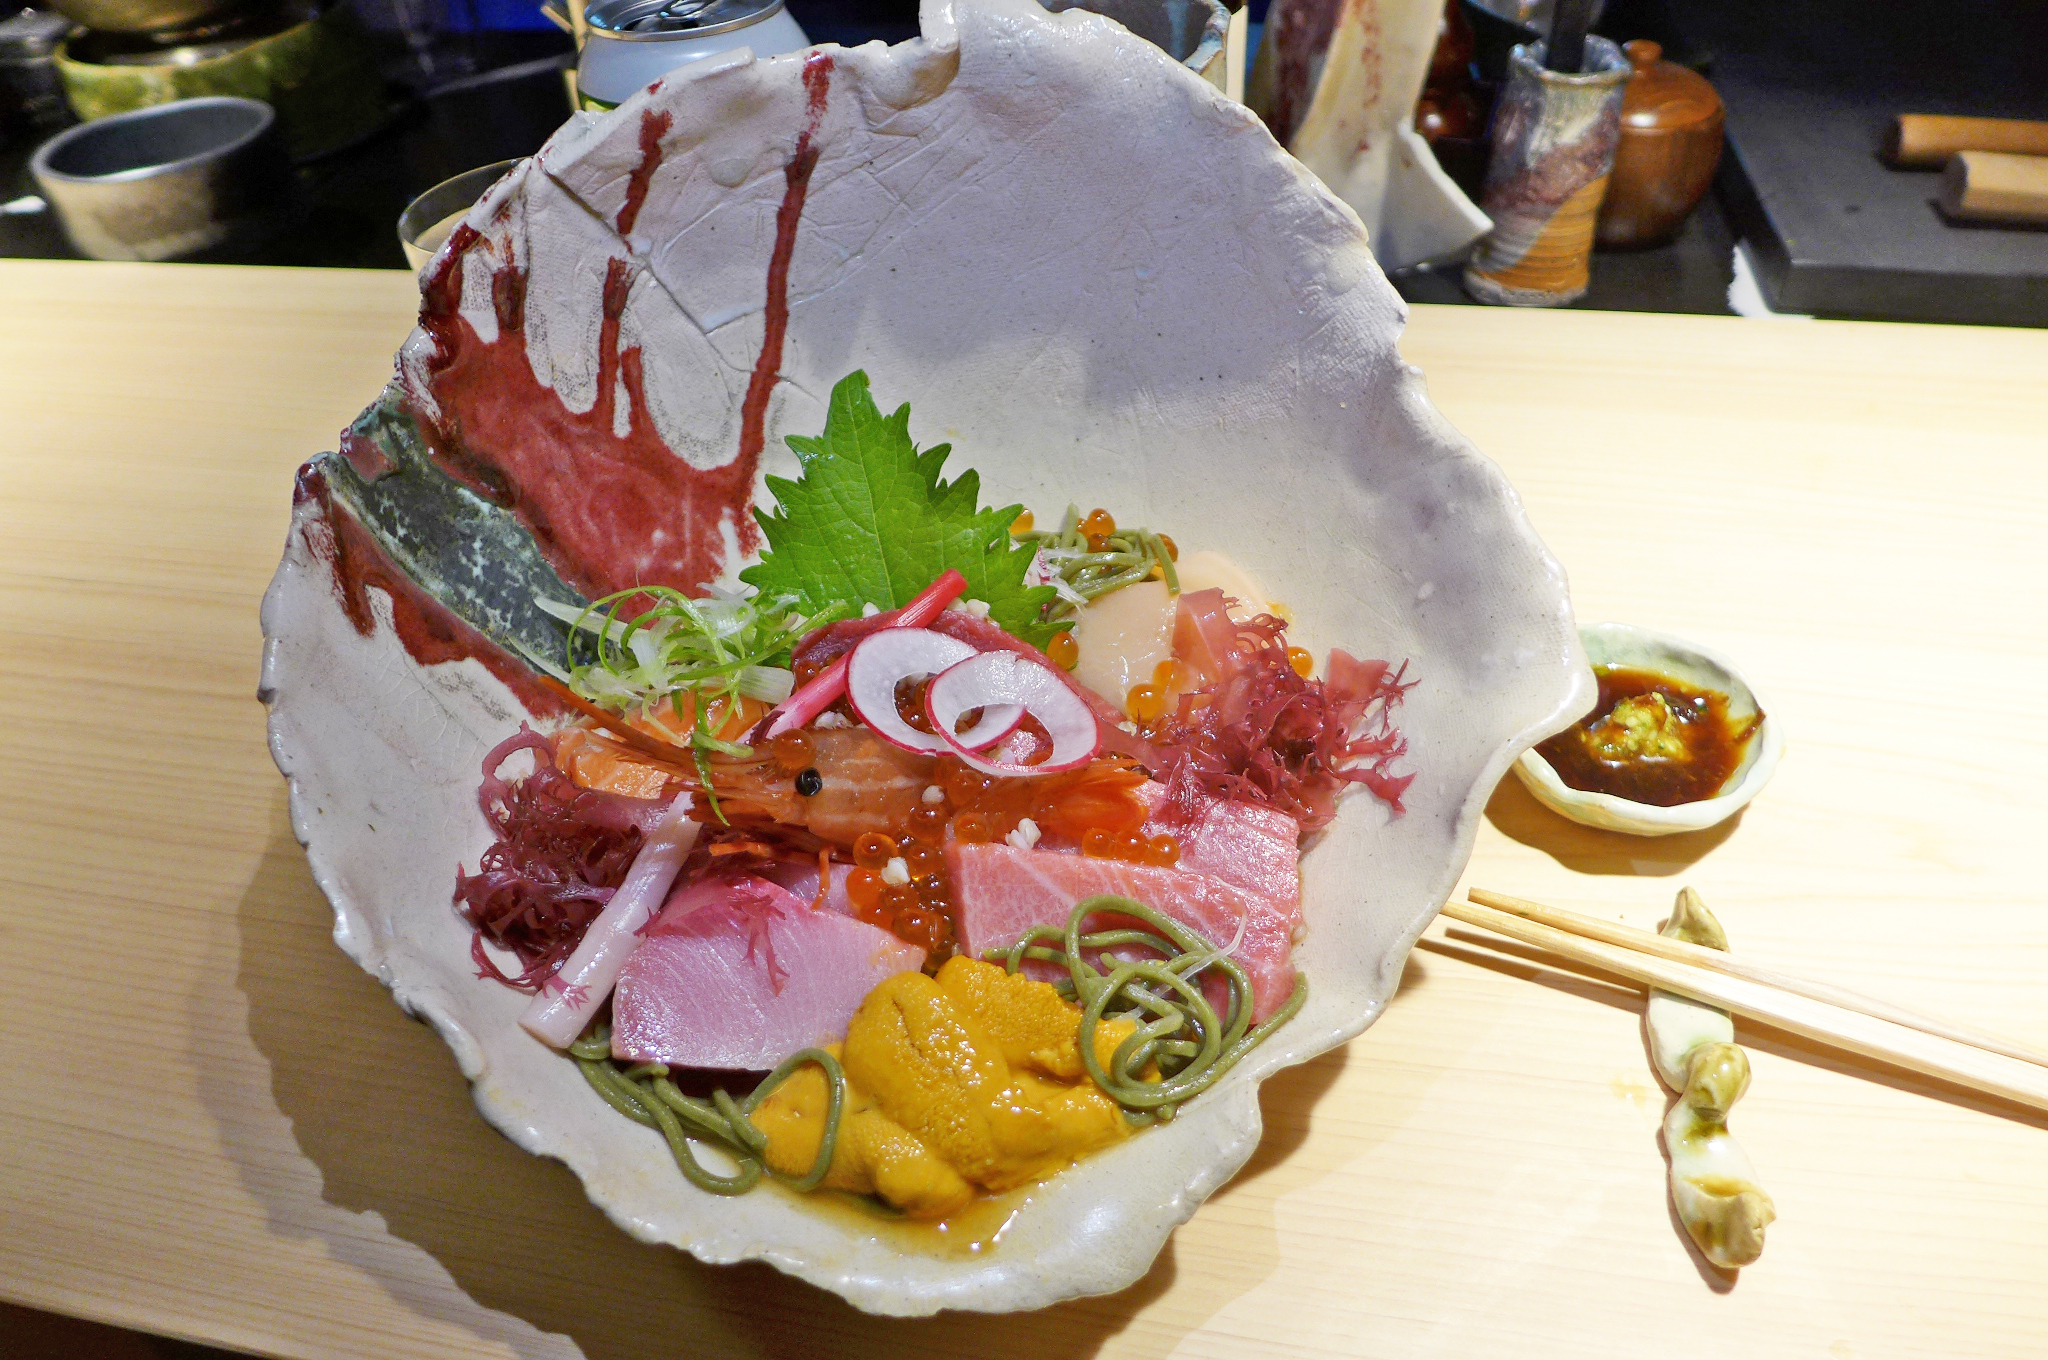 Raw fish in a white conical bowl with green noodle peeping out underneath.